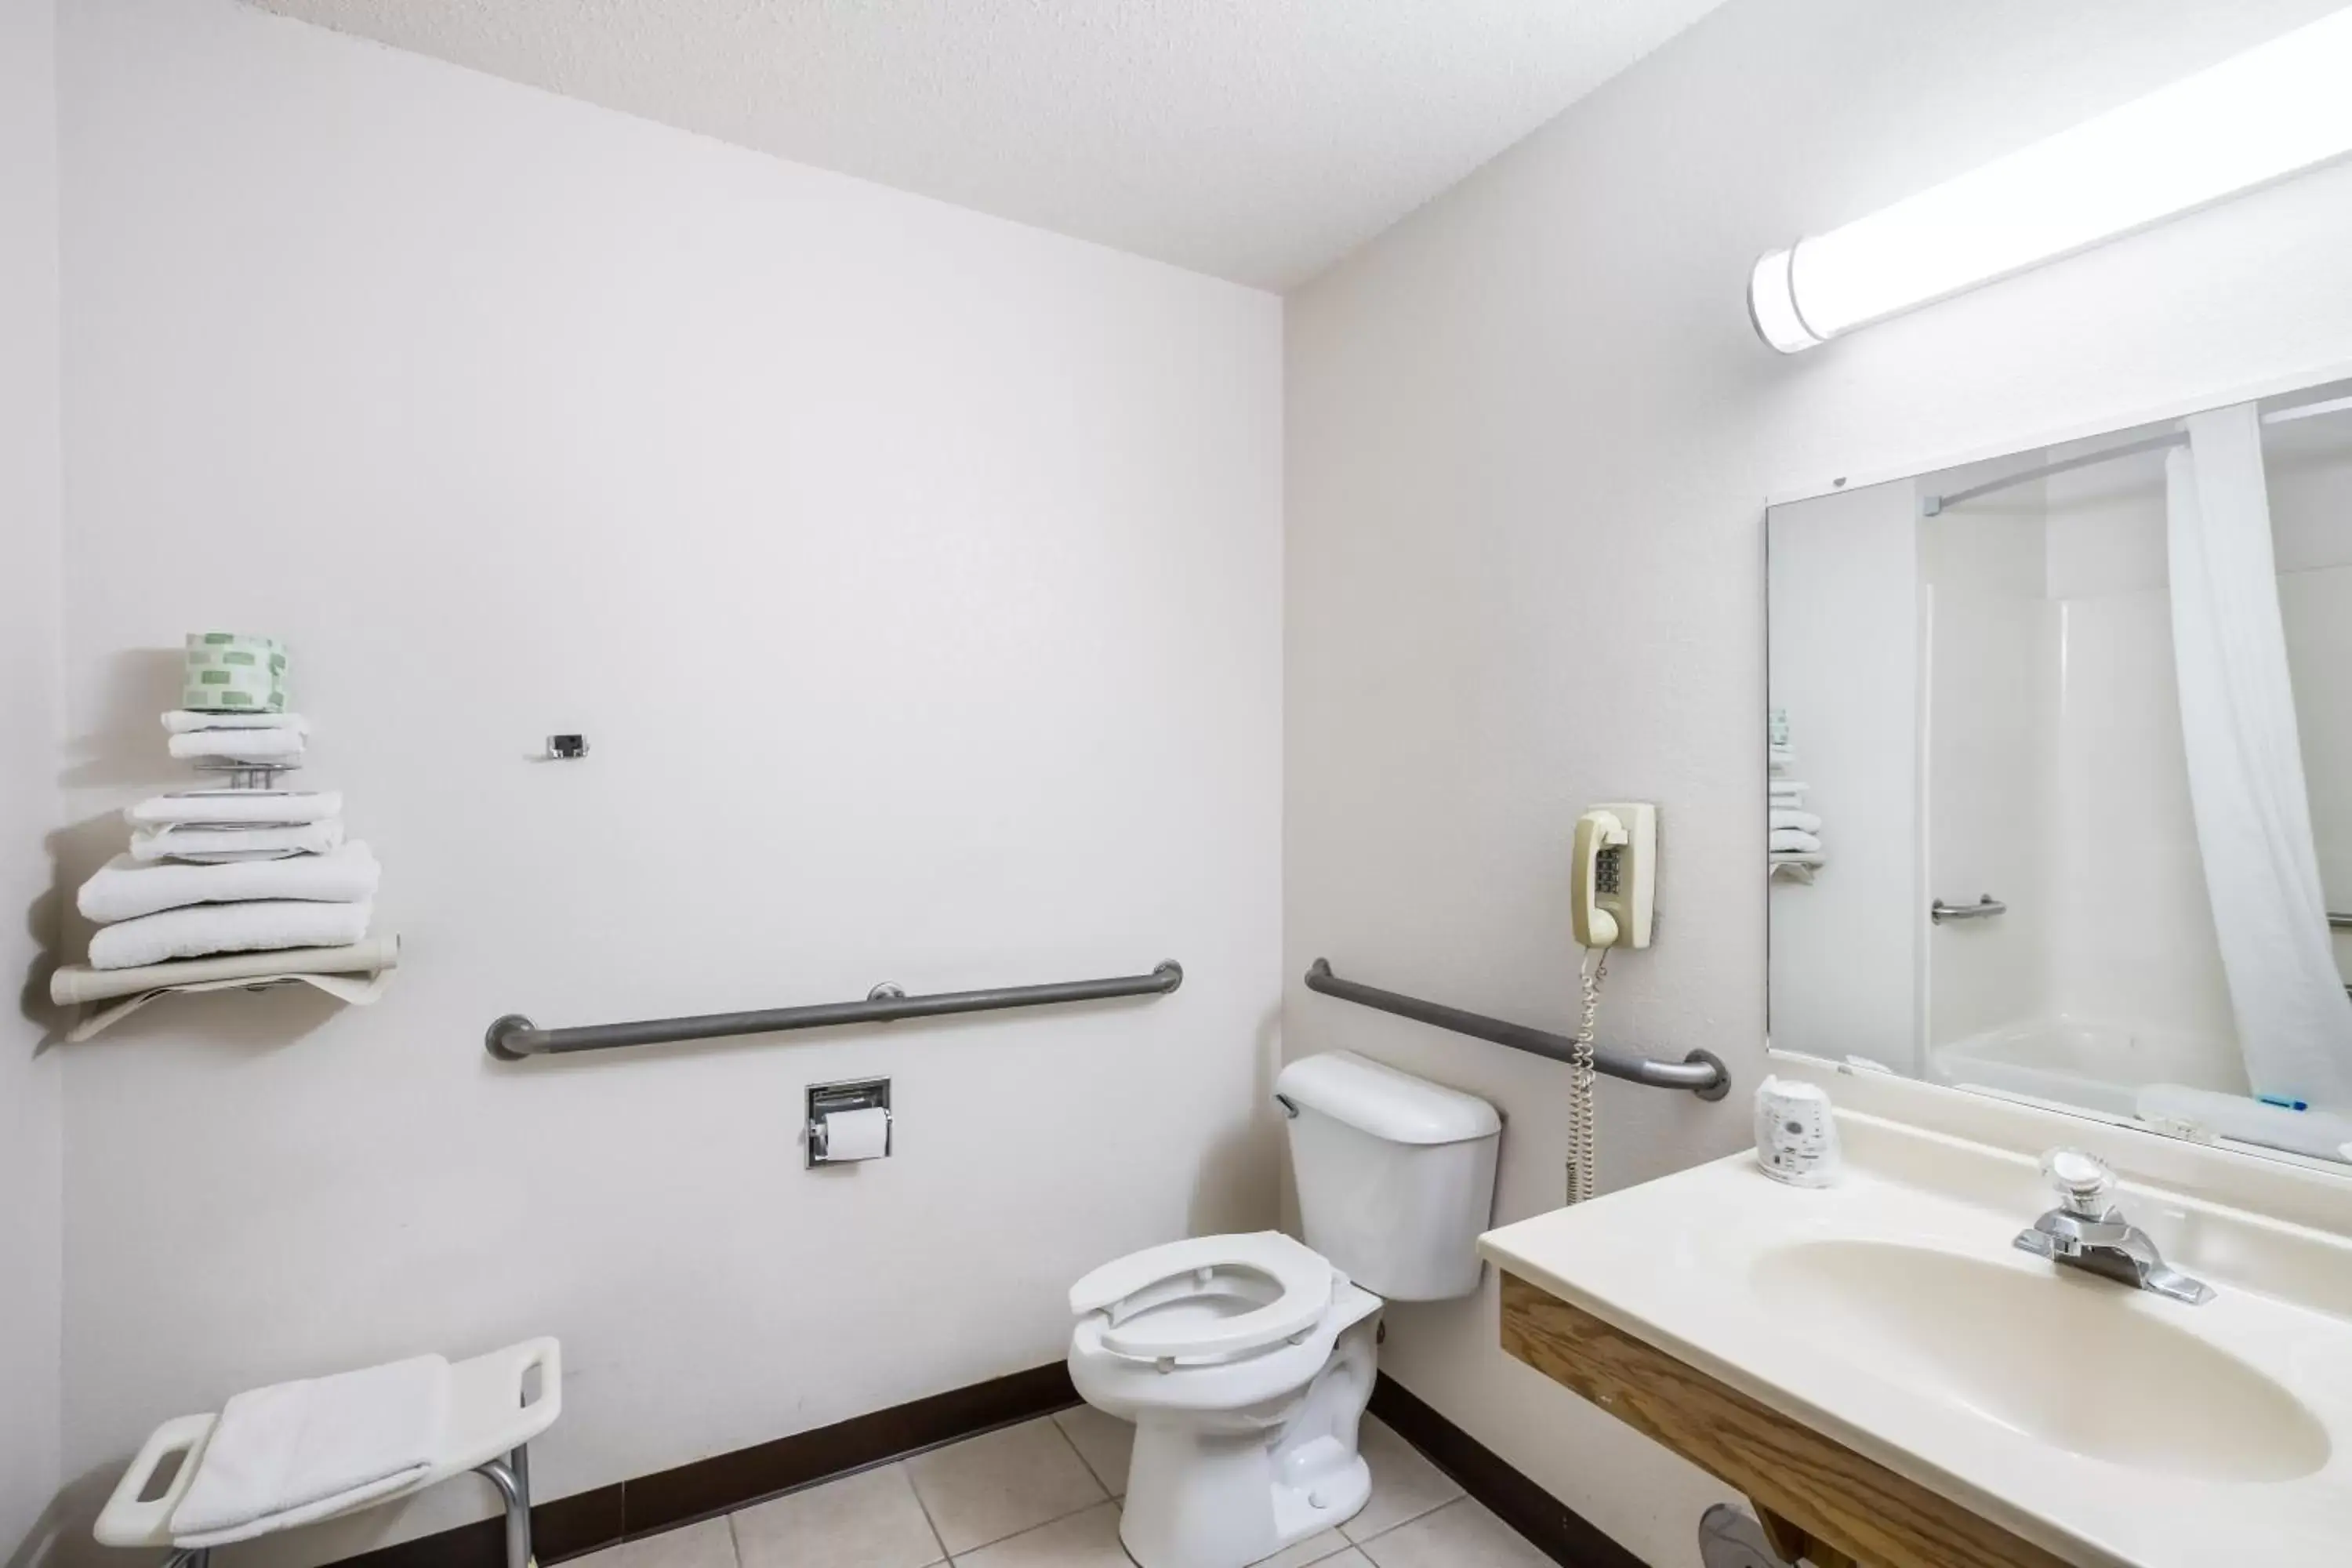 Facility for disabled guests, Bathroom in Americas Best Value Inn Charlotte